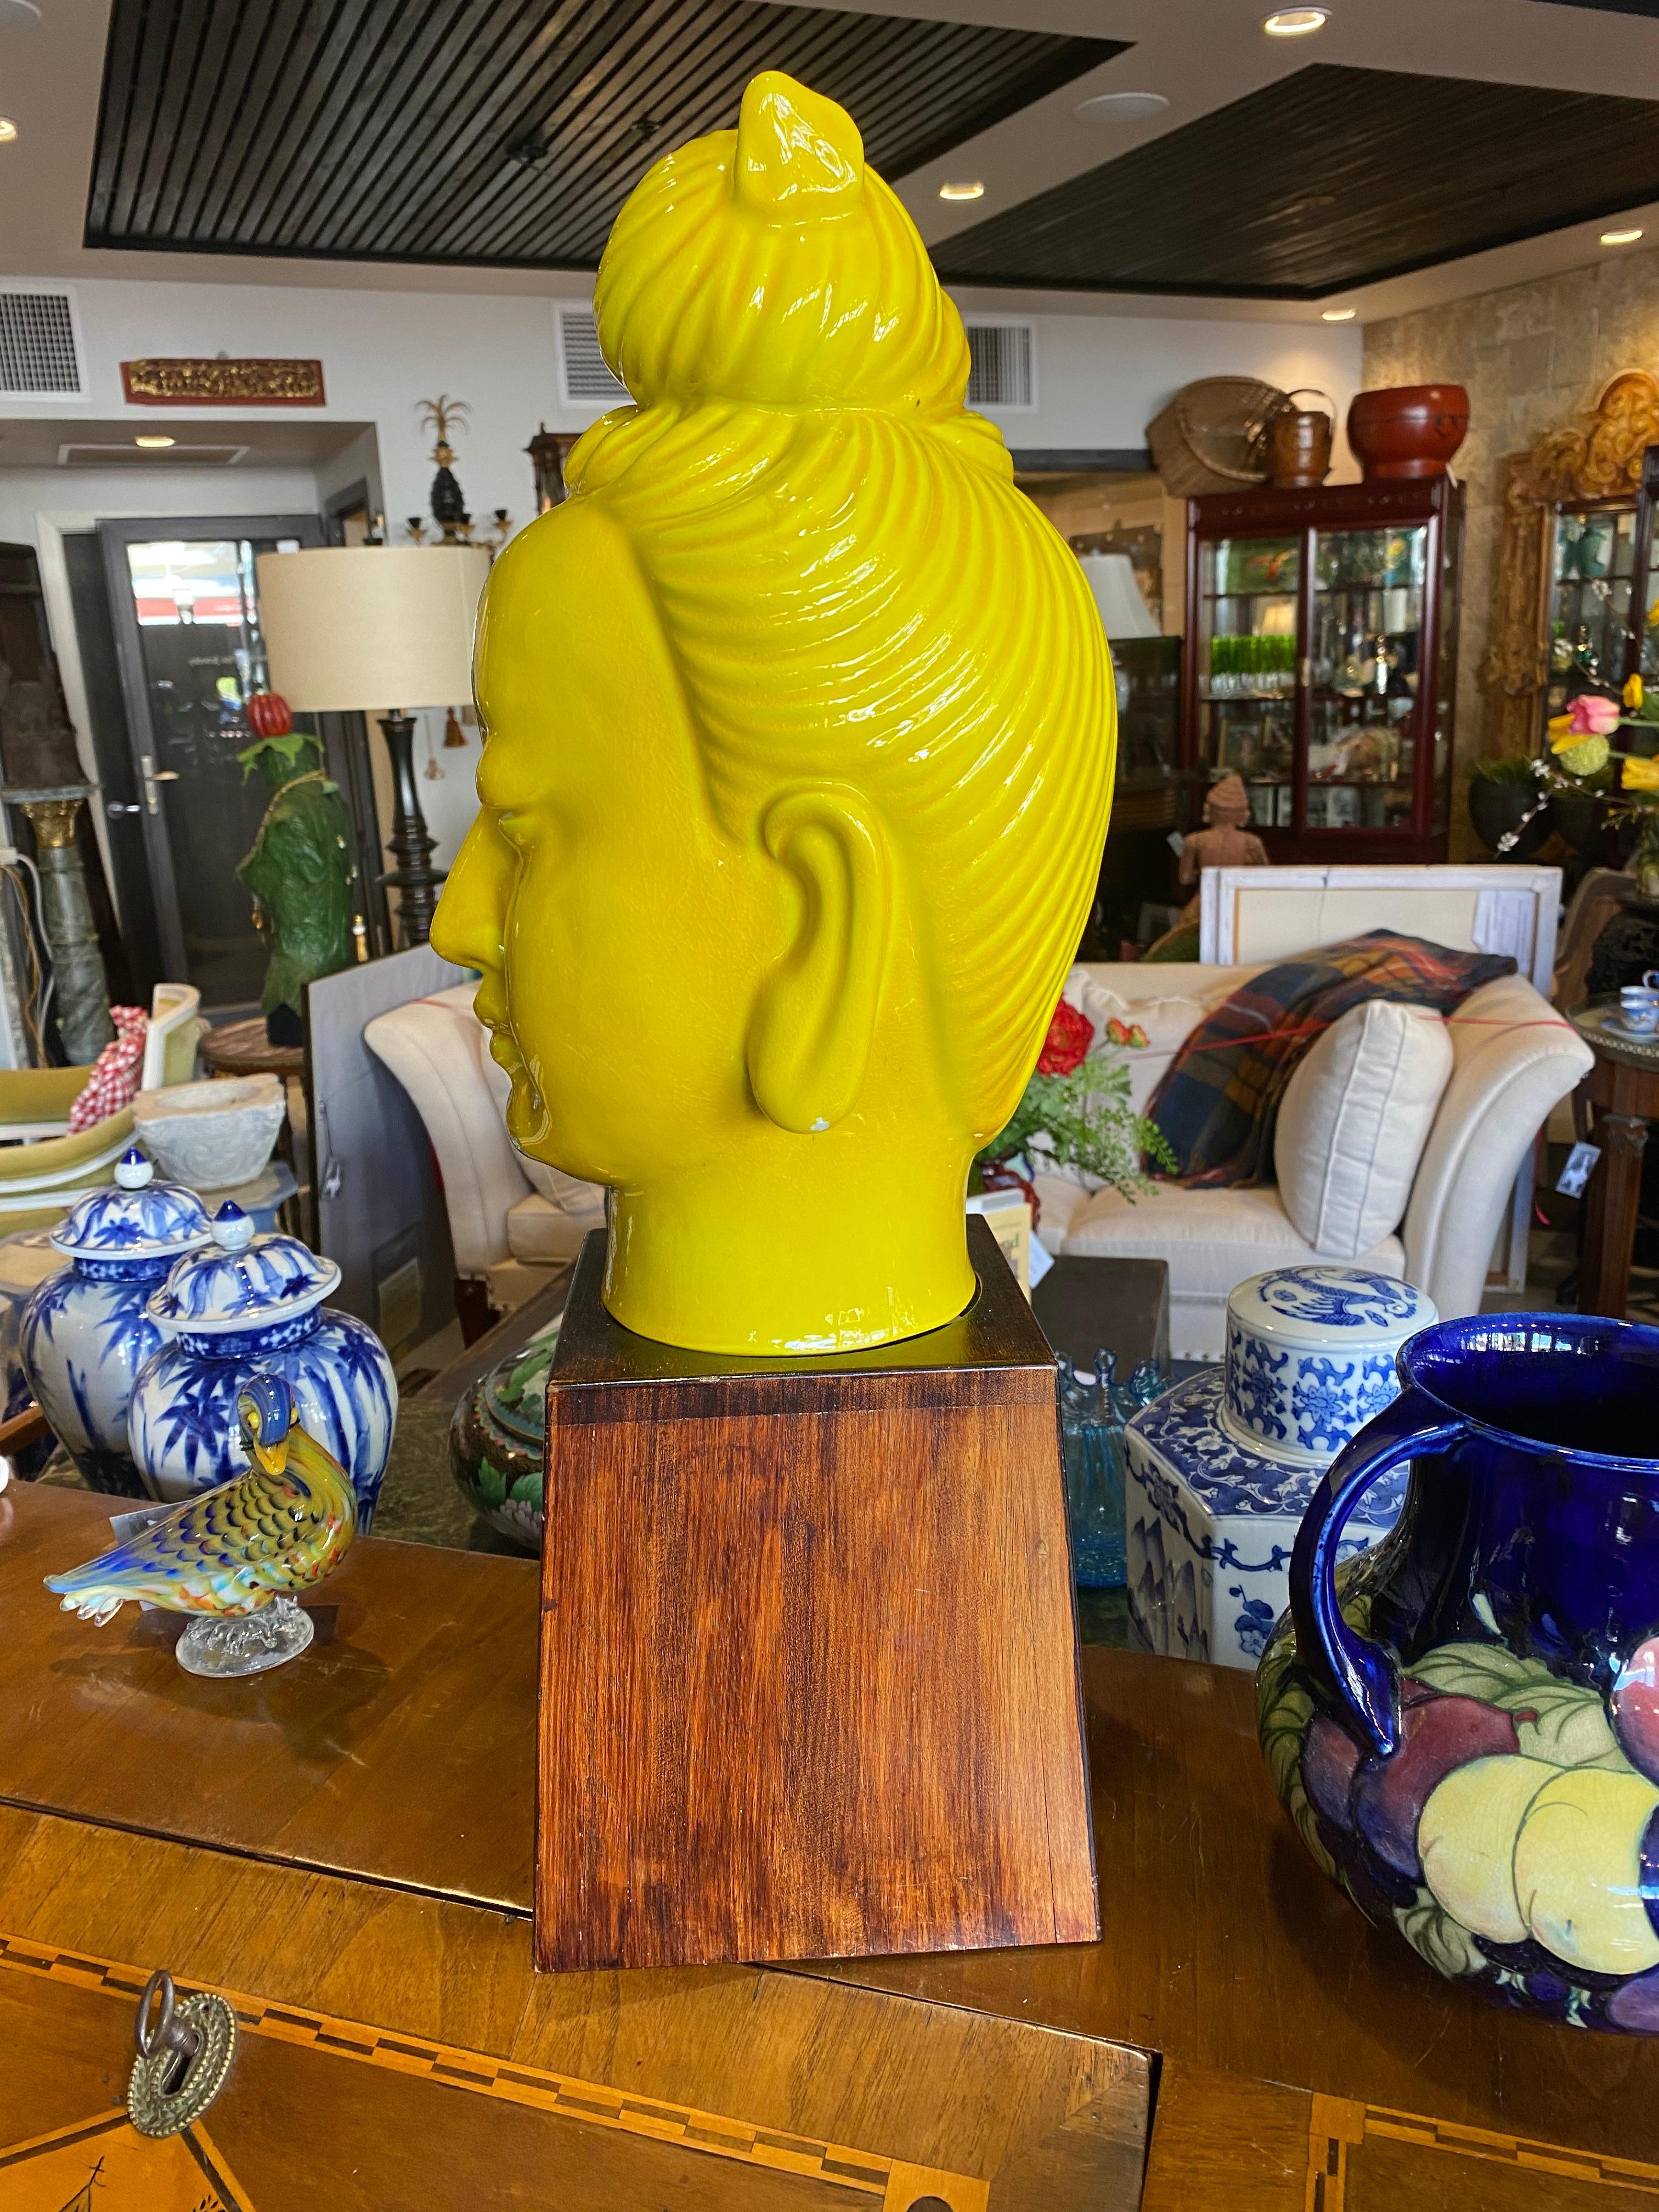 This piece was made in 1950-1960 you can tell by the yellow enamel paint and custom made wooden stand for this head. She has a different look then most a smile! For good luck.